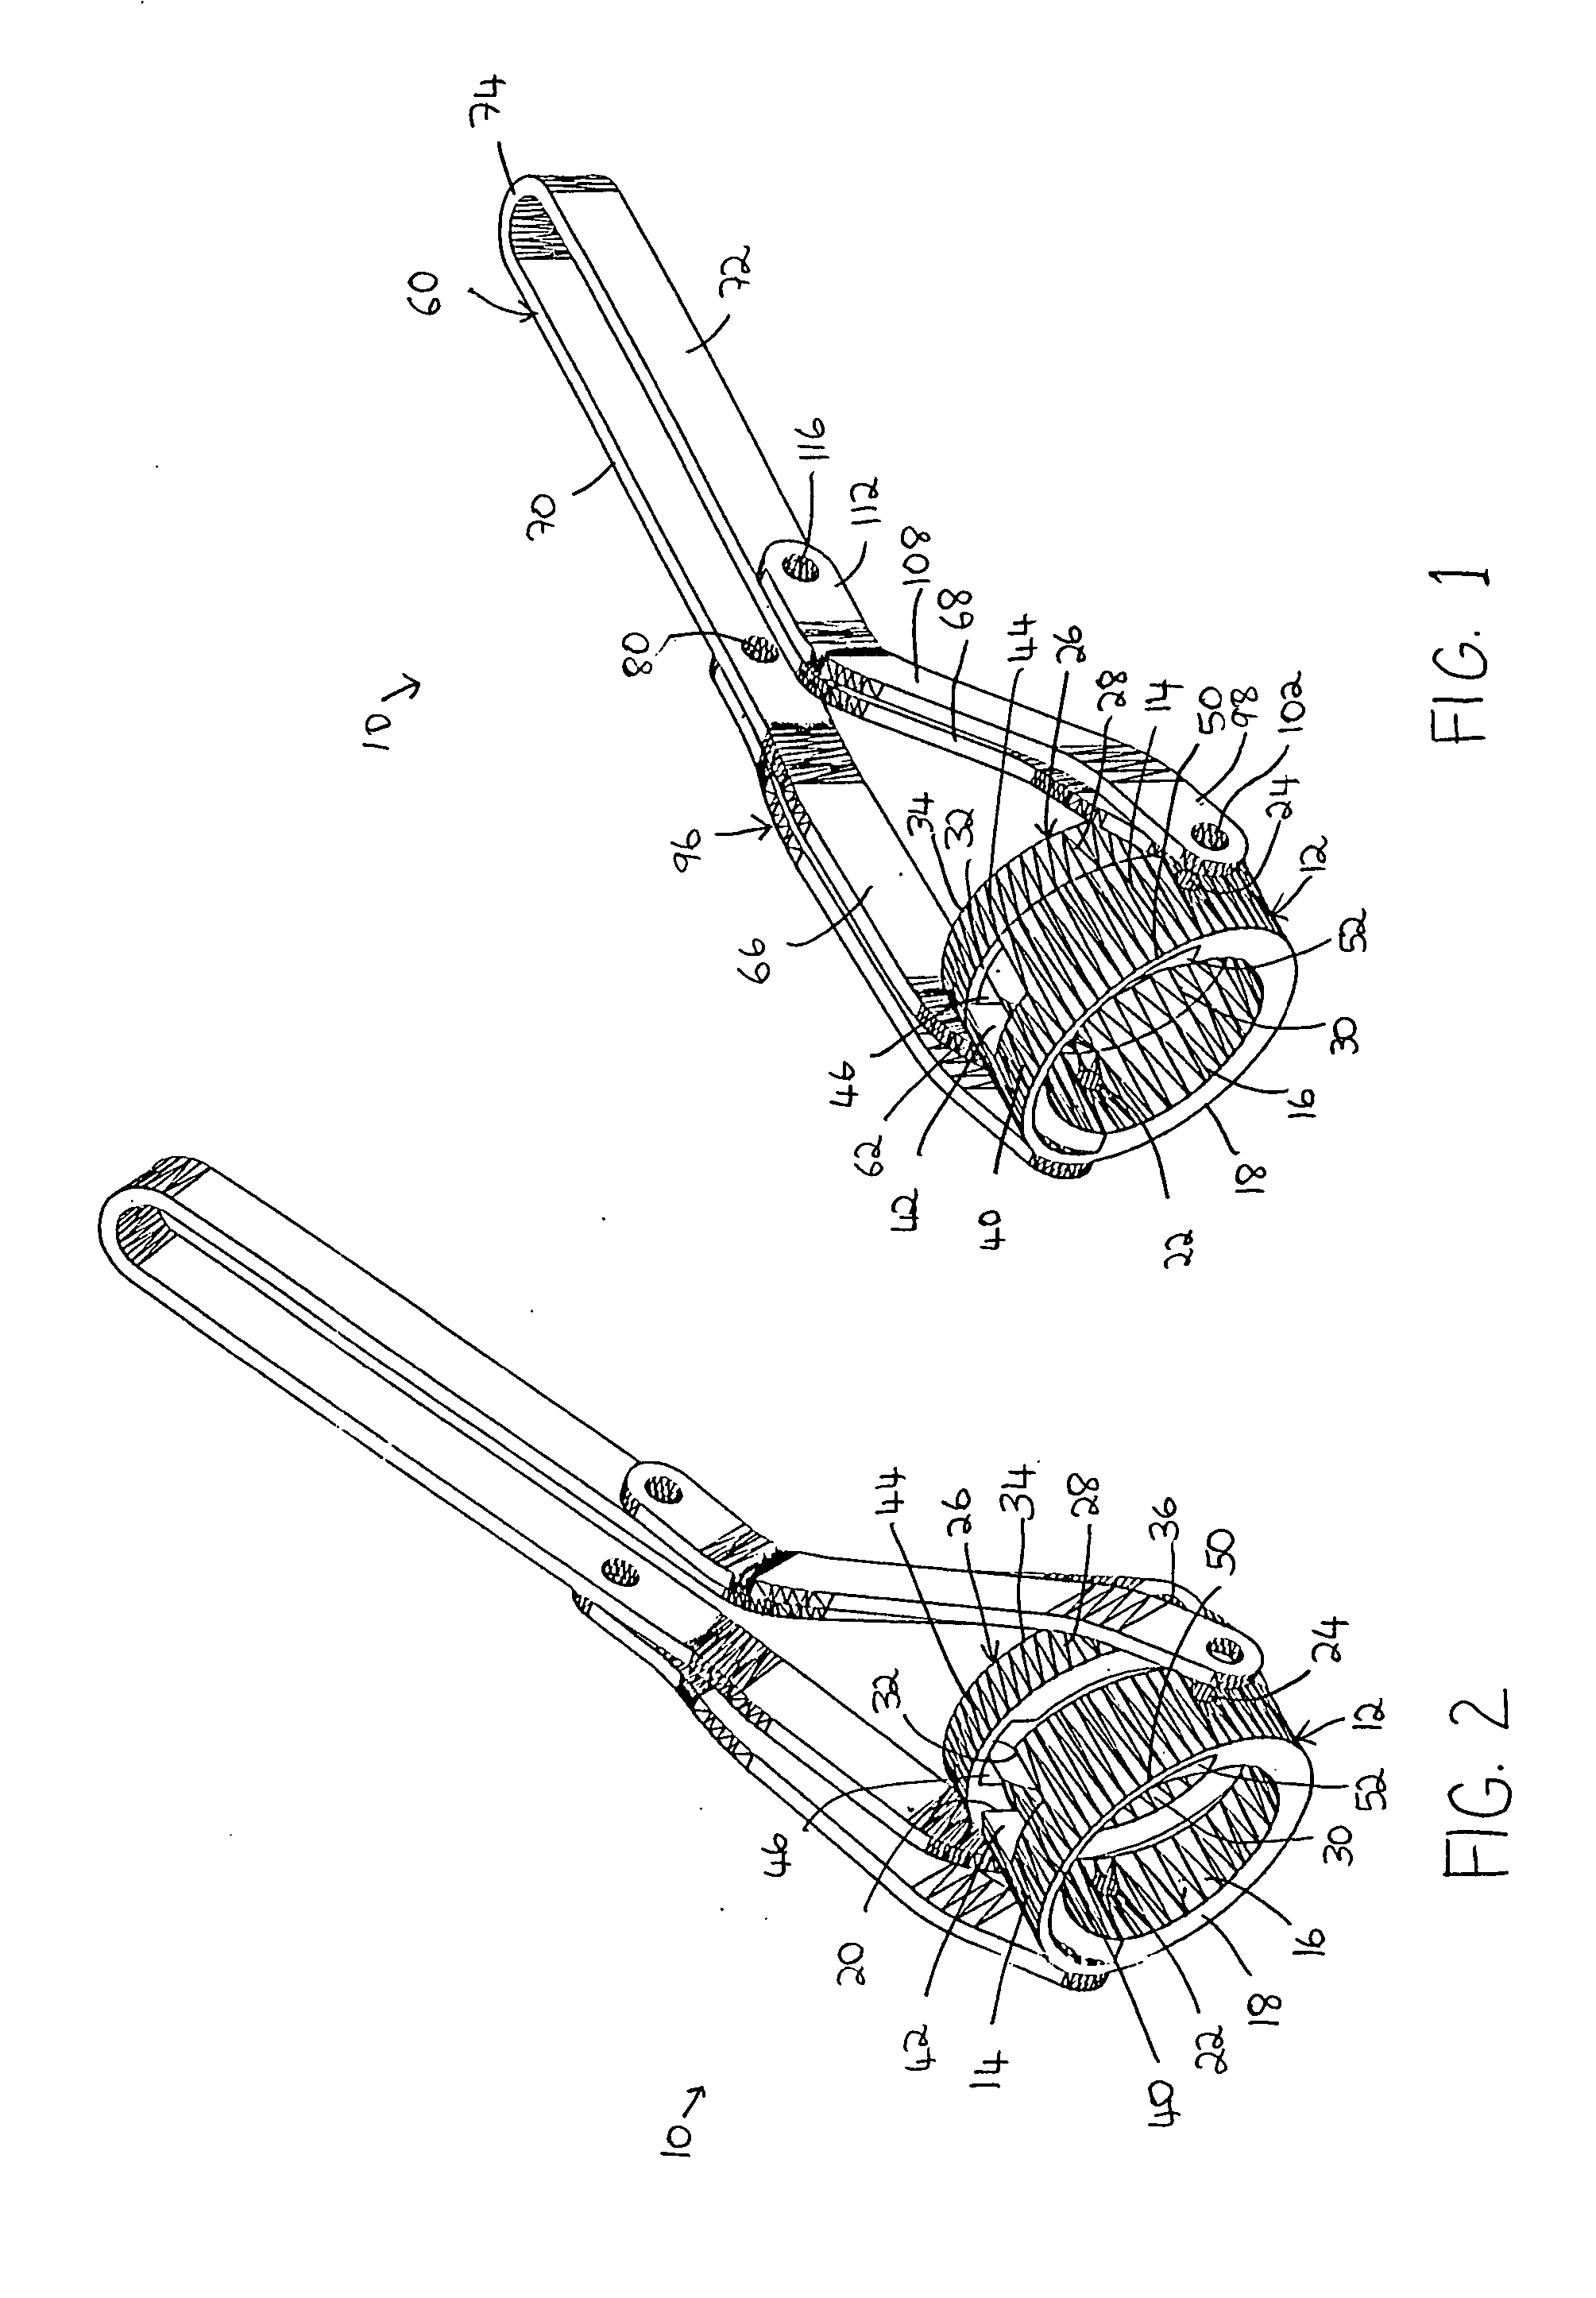 Clamp connection and release device